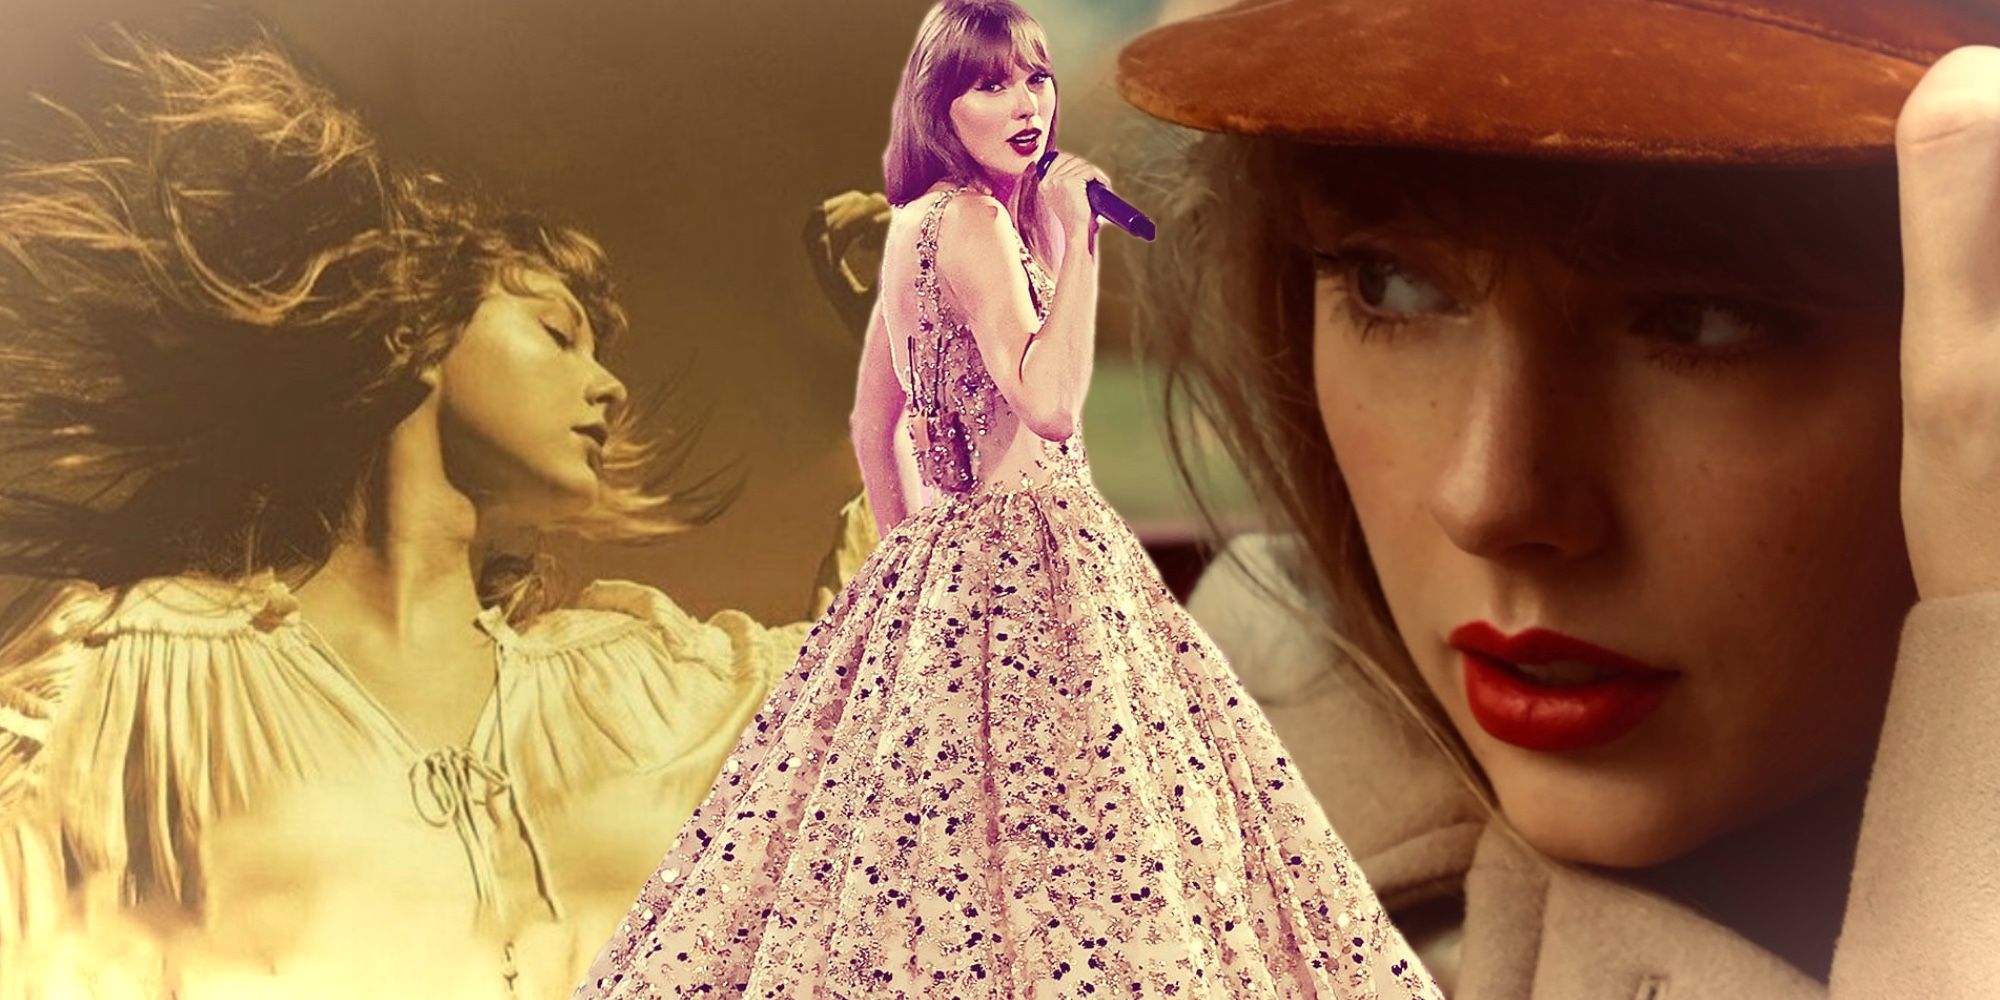 A composite image of Taylor Swift and her album covers 